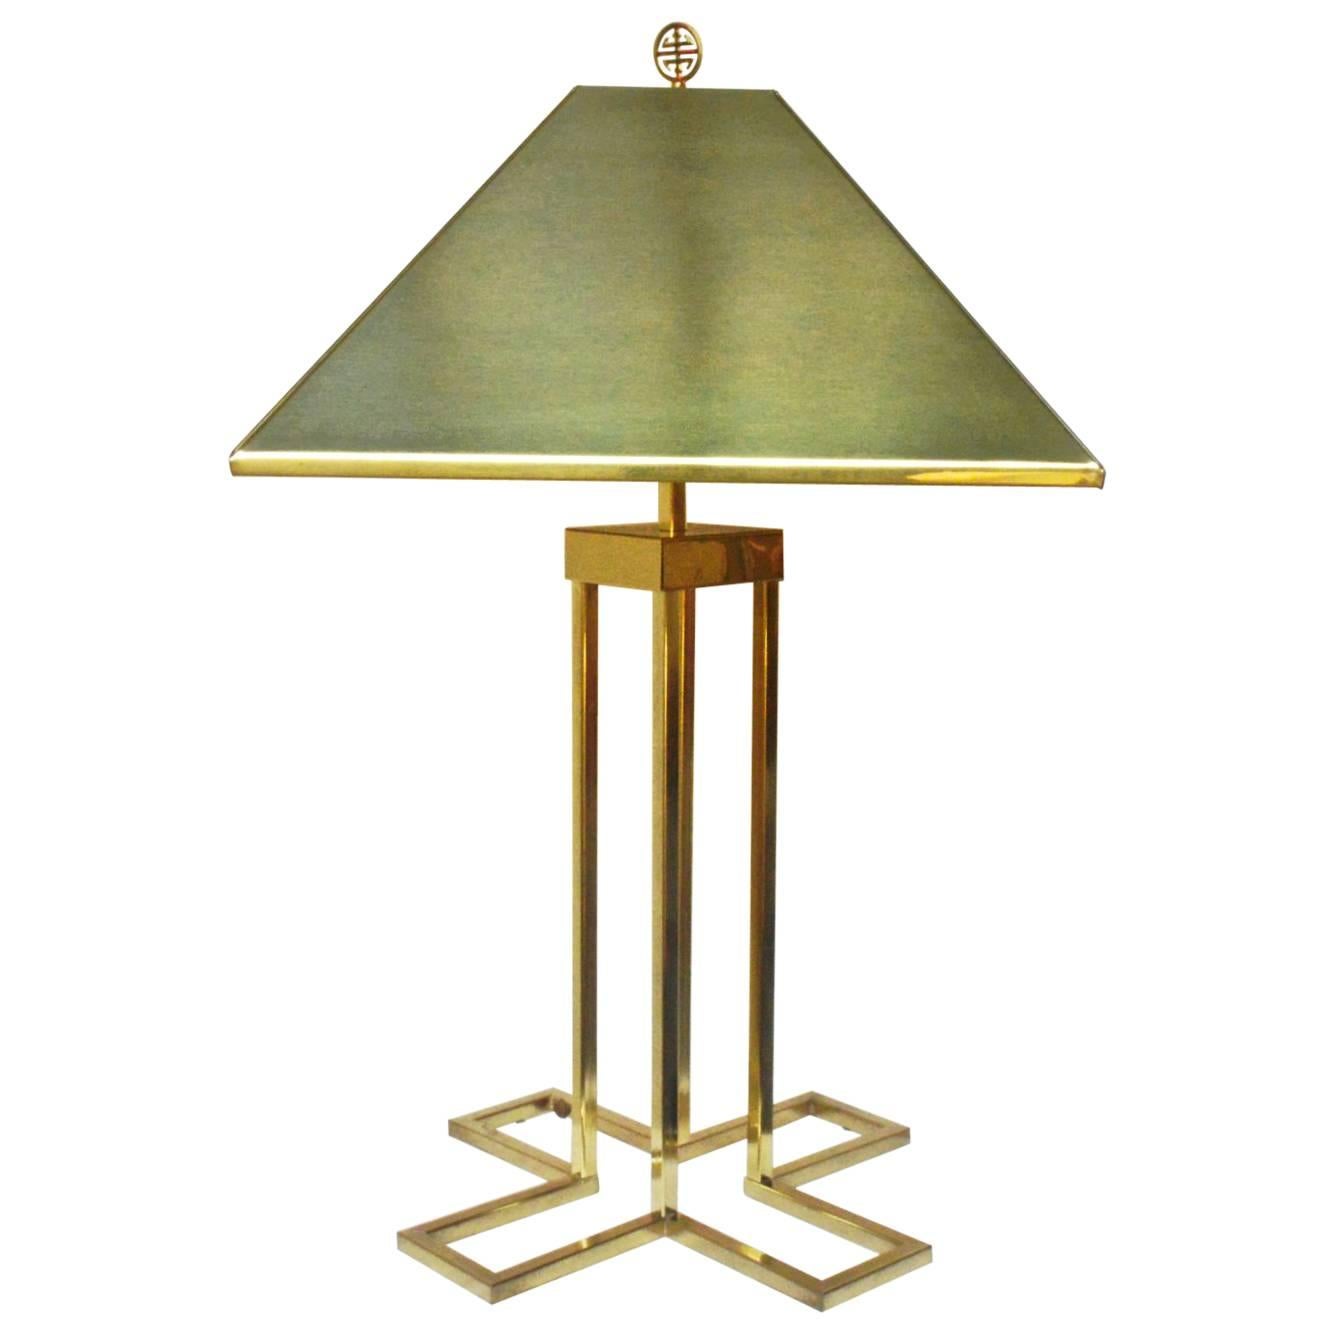 Brass Table Lamp by C. Jere, Signed